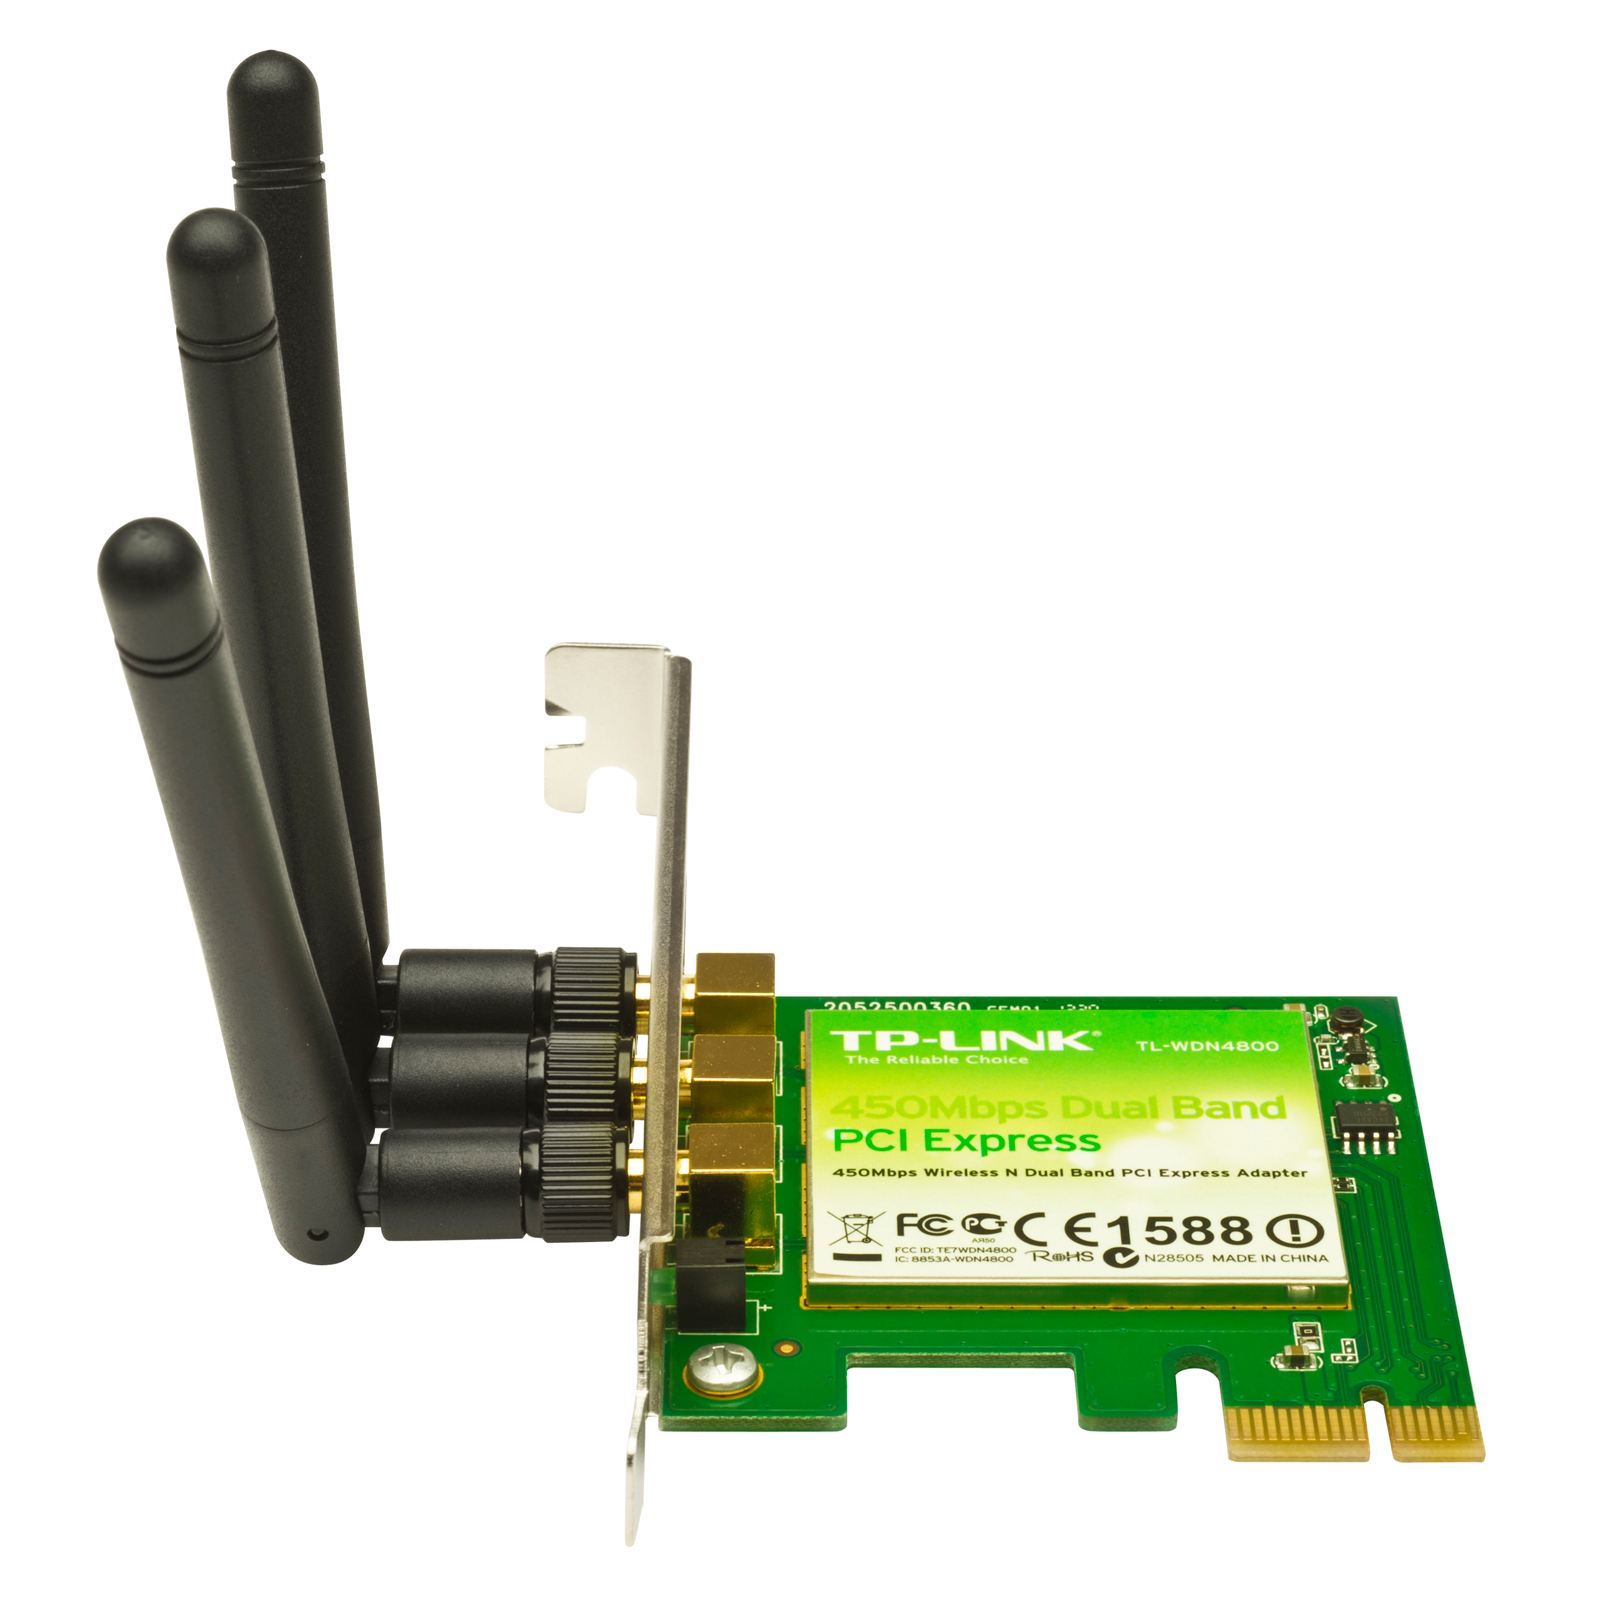 Always Subsidy blend Tp-link N900 Wireless Dual Band Pci Express Adapter Tl-wdn4800 - Technology  Market - Nigeria